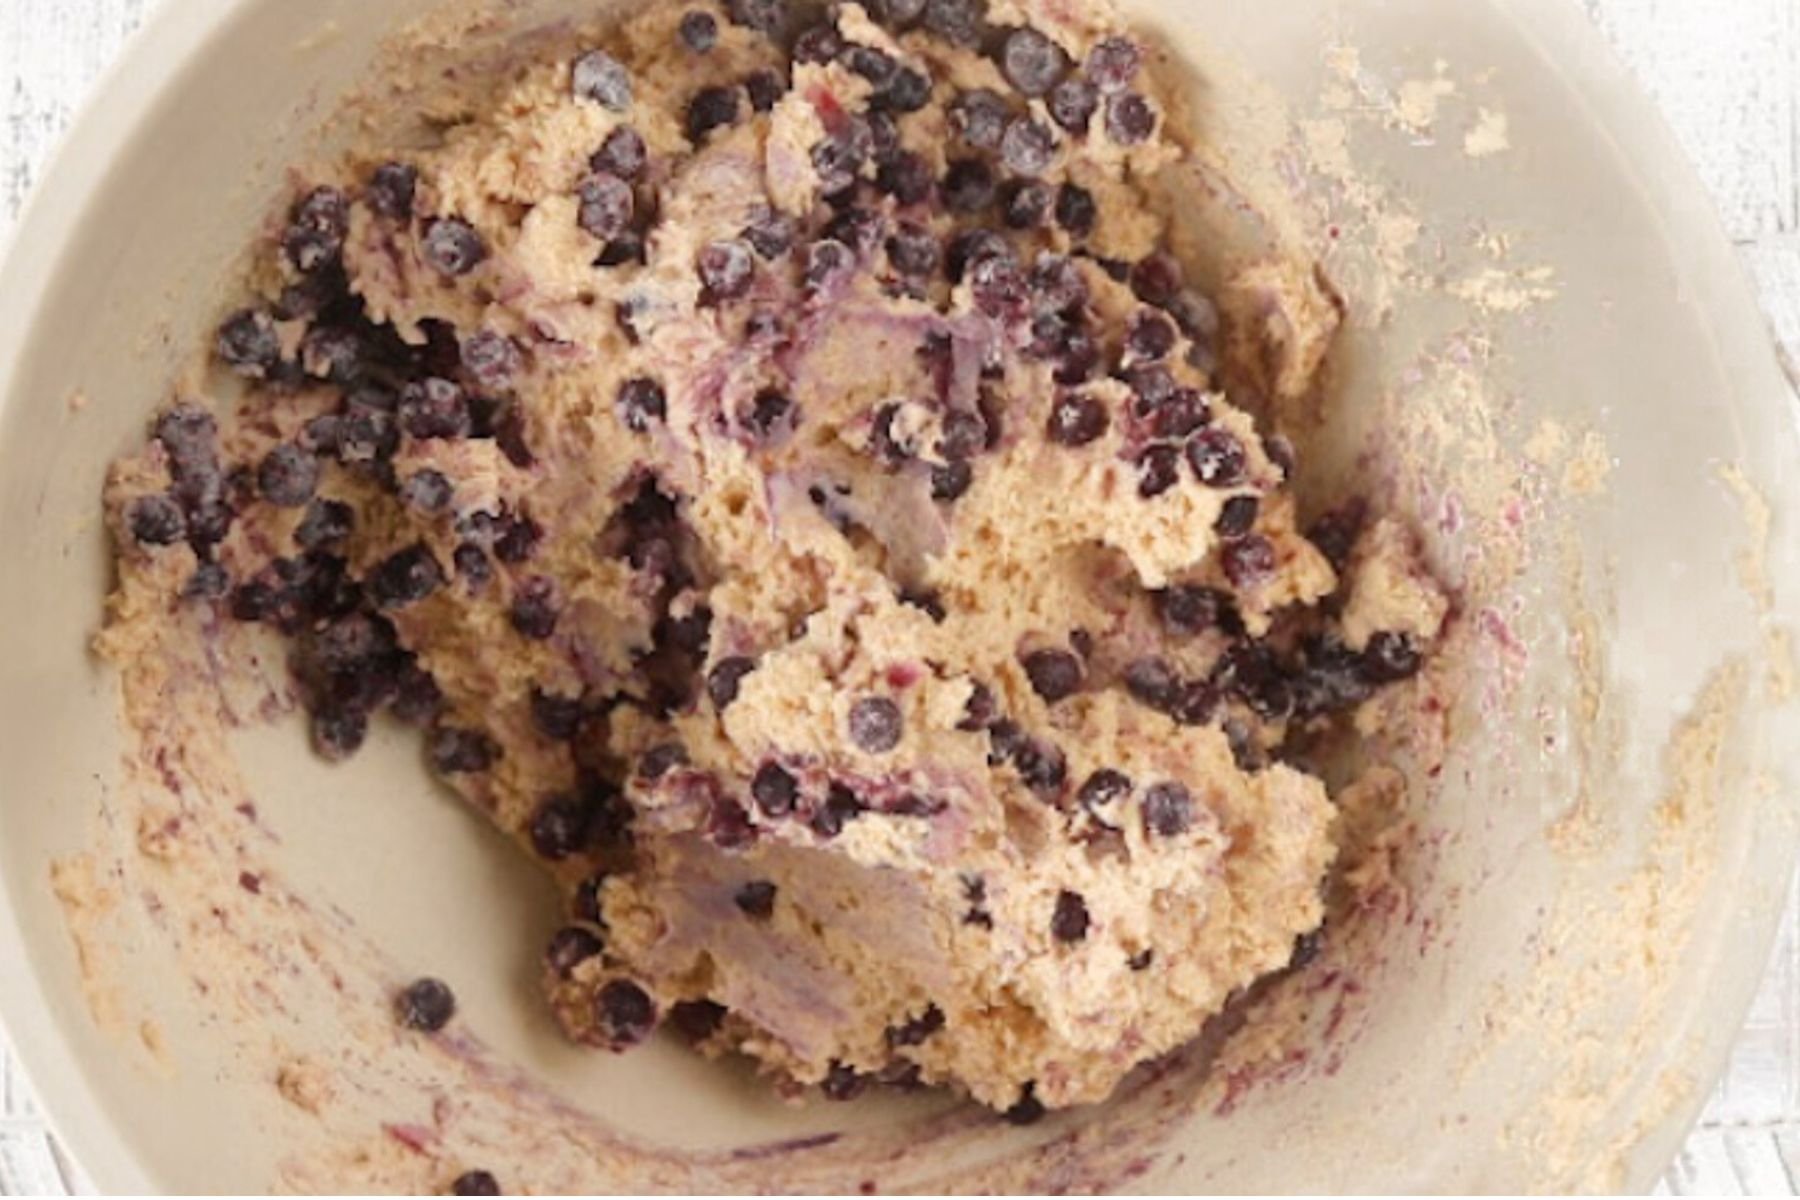 Step 4 - Blueberry Protein Muffins. Mix the wet and dry ingredients to make muffin batter.